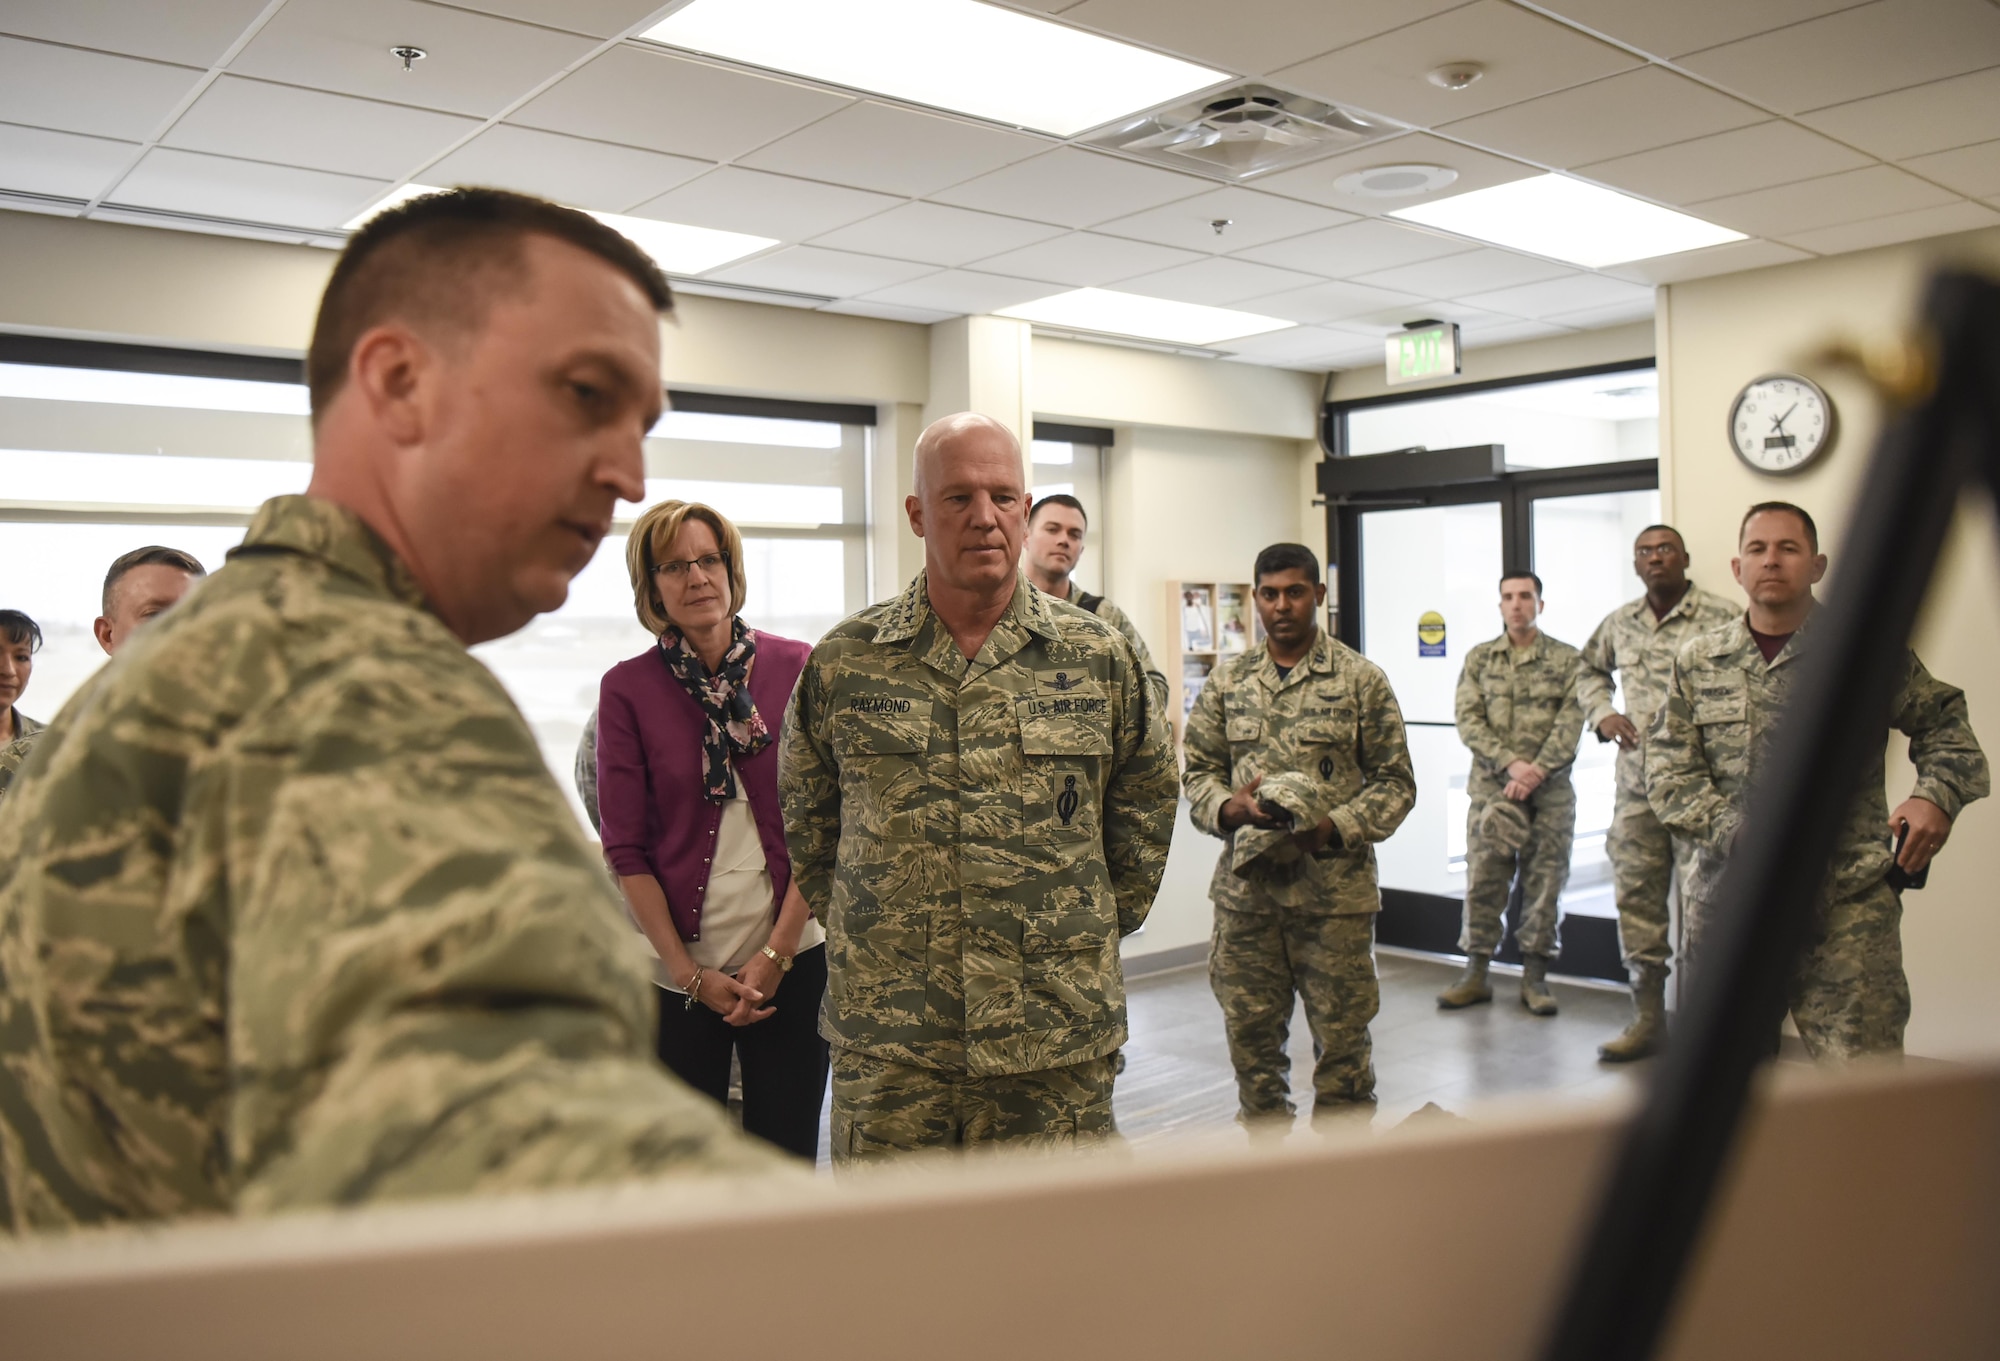 Col. Matthew Hanson, 460th Medical Group commander, left, outlined the future medical facilities as they move on base to better support Team Buckley to Gen. Jay Raymond, commander of Air Force Space Command, March 17, 2017, at Buckley Air Force Base, Colo. Buckley boasts America’s Premier Space Wing, installation support to 95 multiservice and multinational units, a population of over 94,000 Team Buckley members, and a mission that is critical to the nation’s safety. (U.S. Air Force photo by Airman Holden Faul)